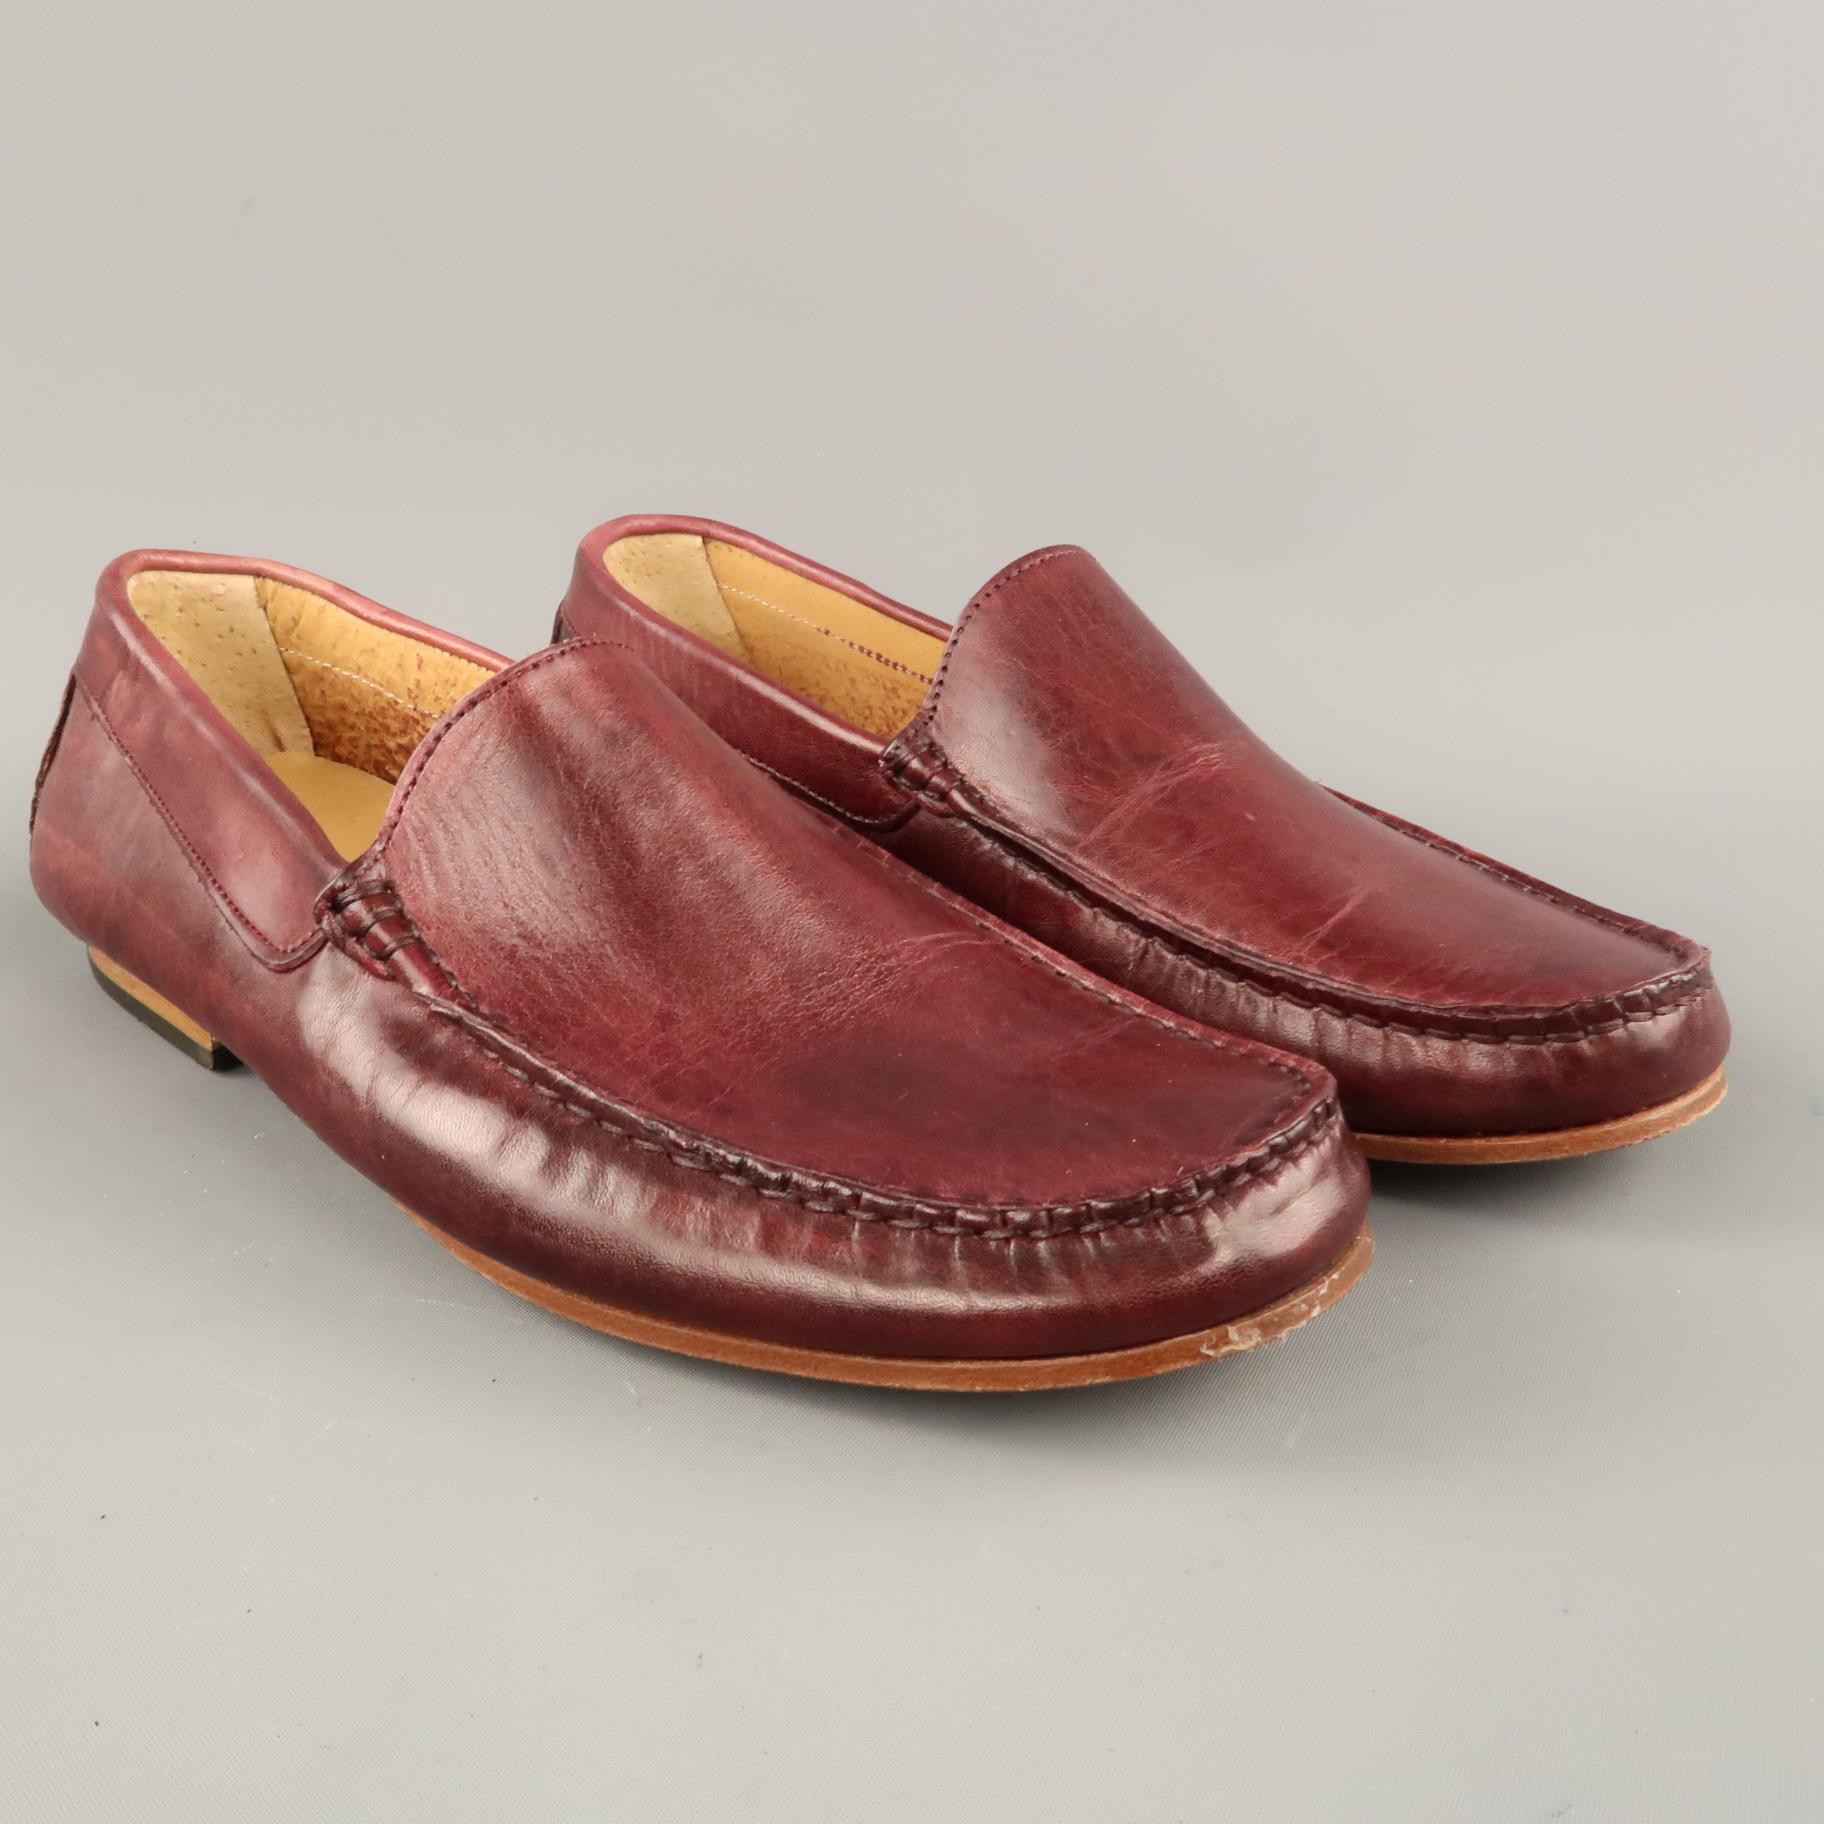 EREDI PISANO loafers come in burgundy leather with an apron top stitch toe. Made in Italy.

Brand New.
Marked: IT 40

Outsole: 10.75 x 4 in.